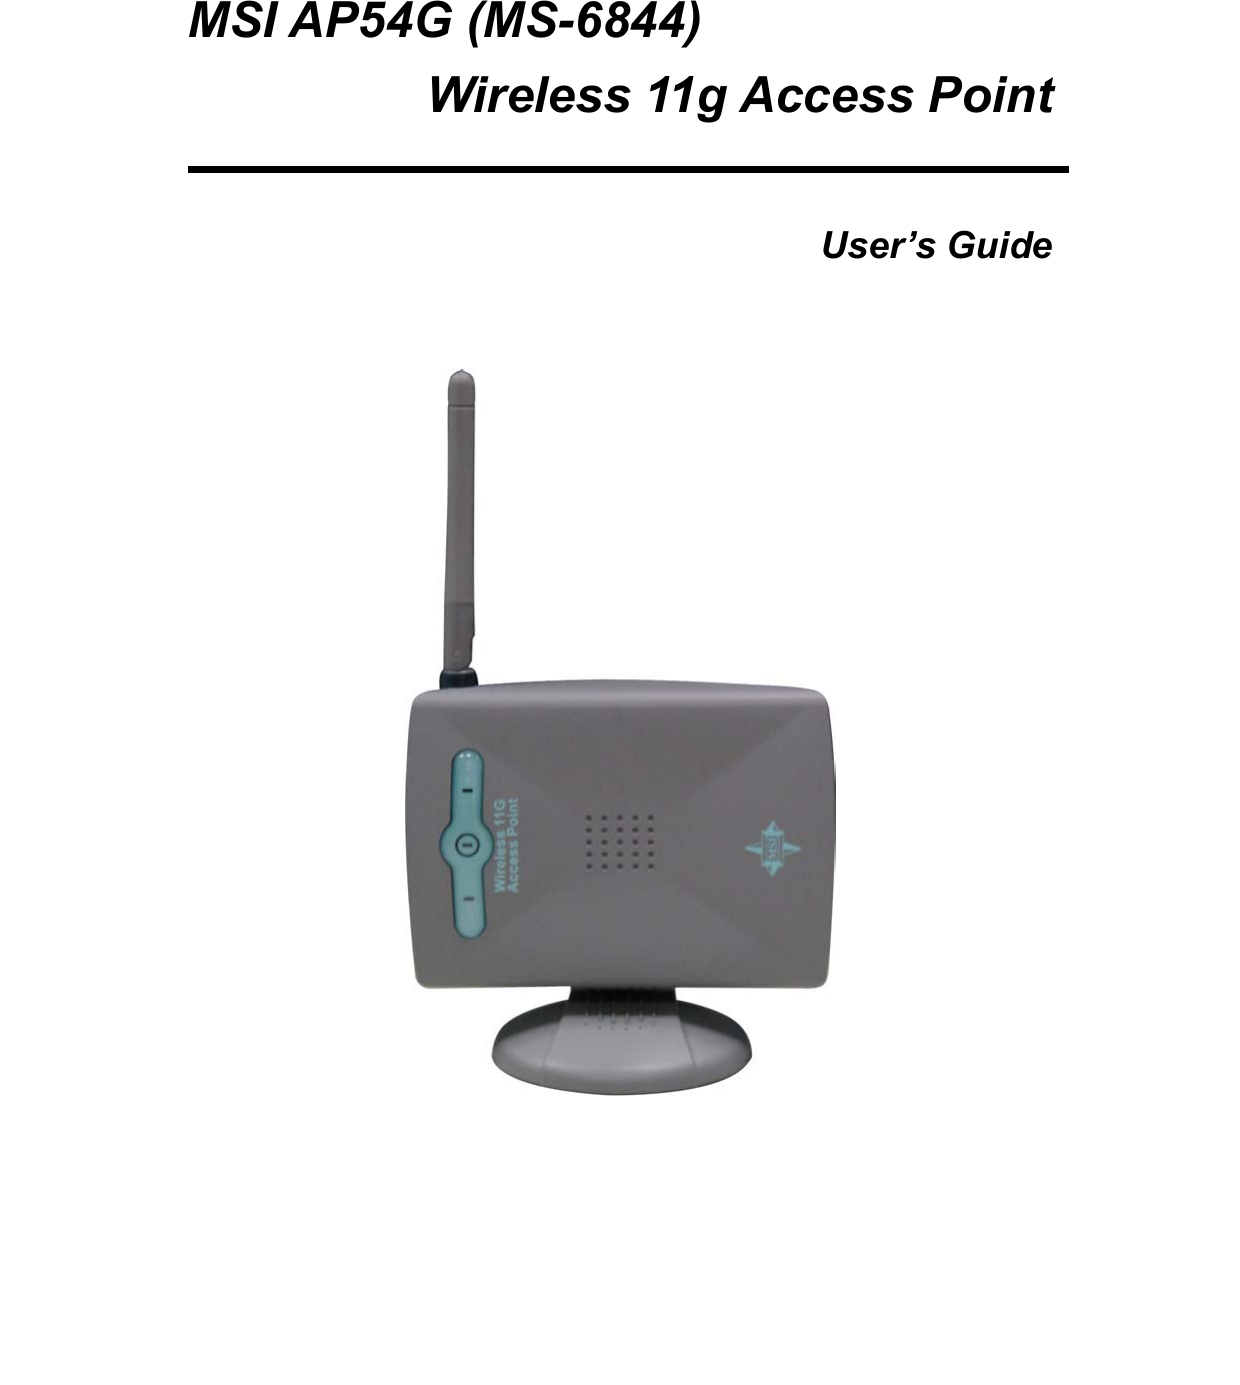   MSI AP54G (MS-6844) Wireless 11g Access Point  User’s Guide     